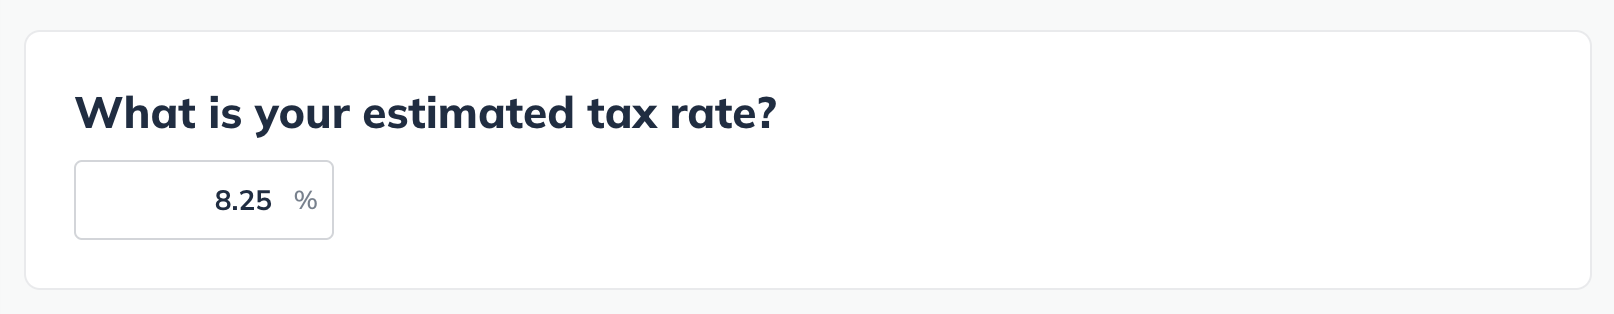 what_is_your_estimated_tax_rate.png